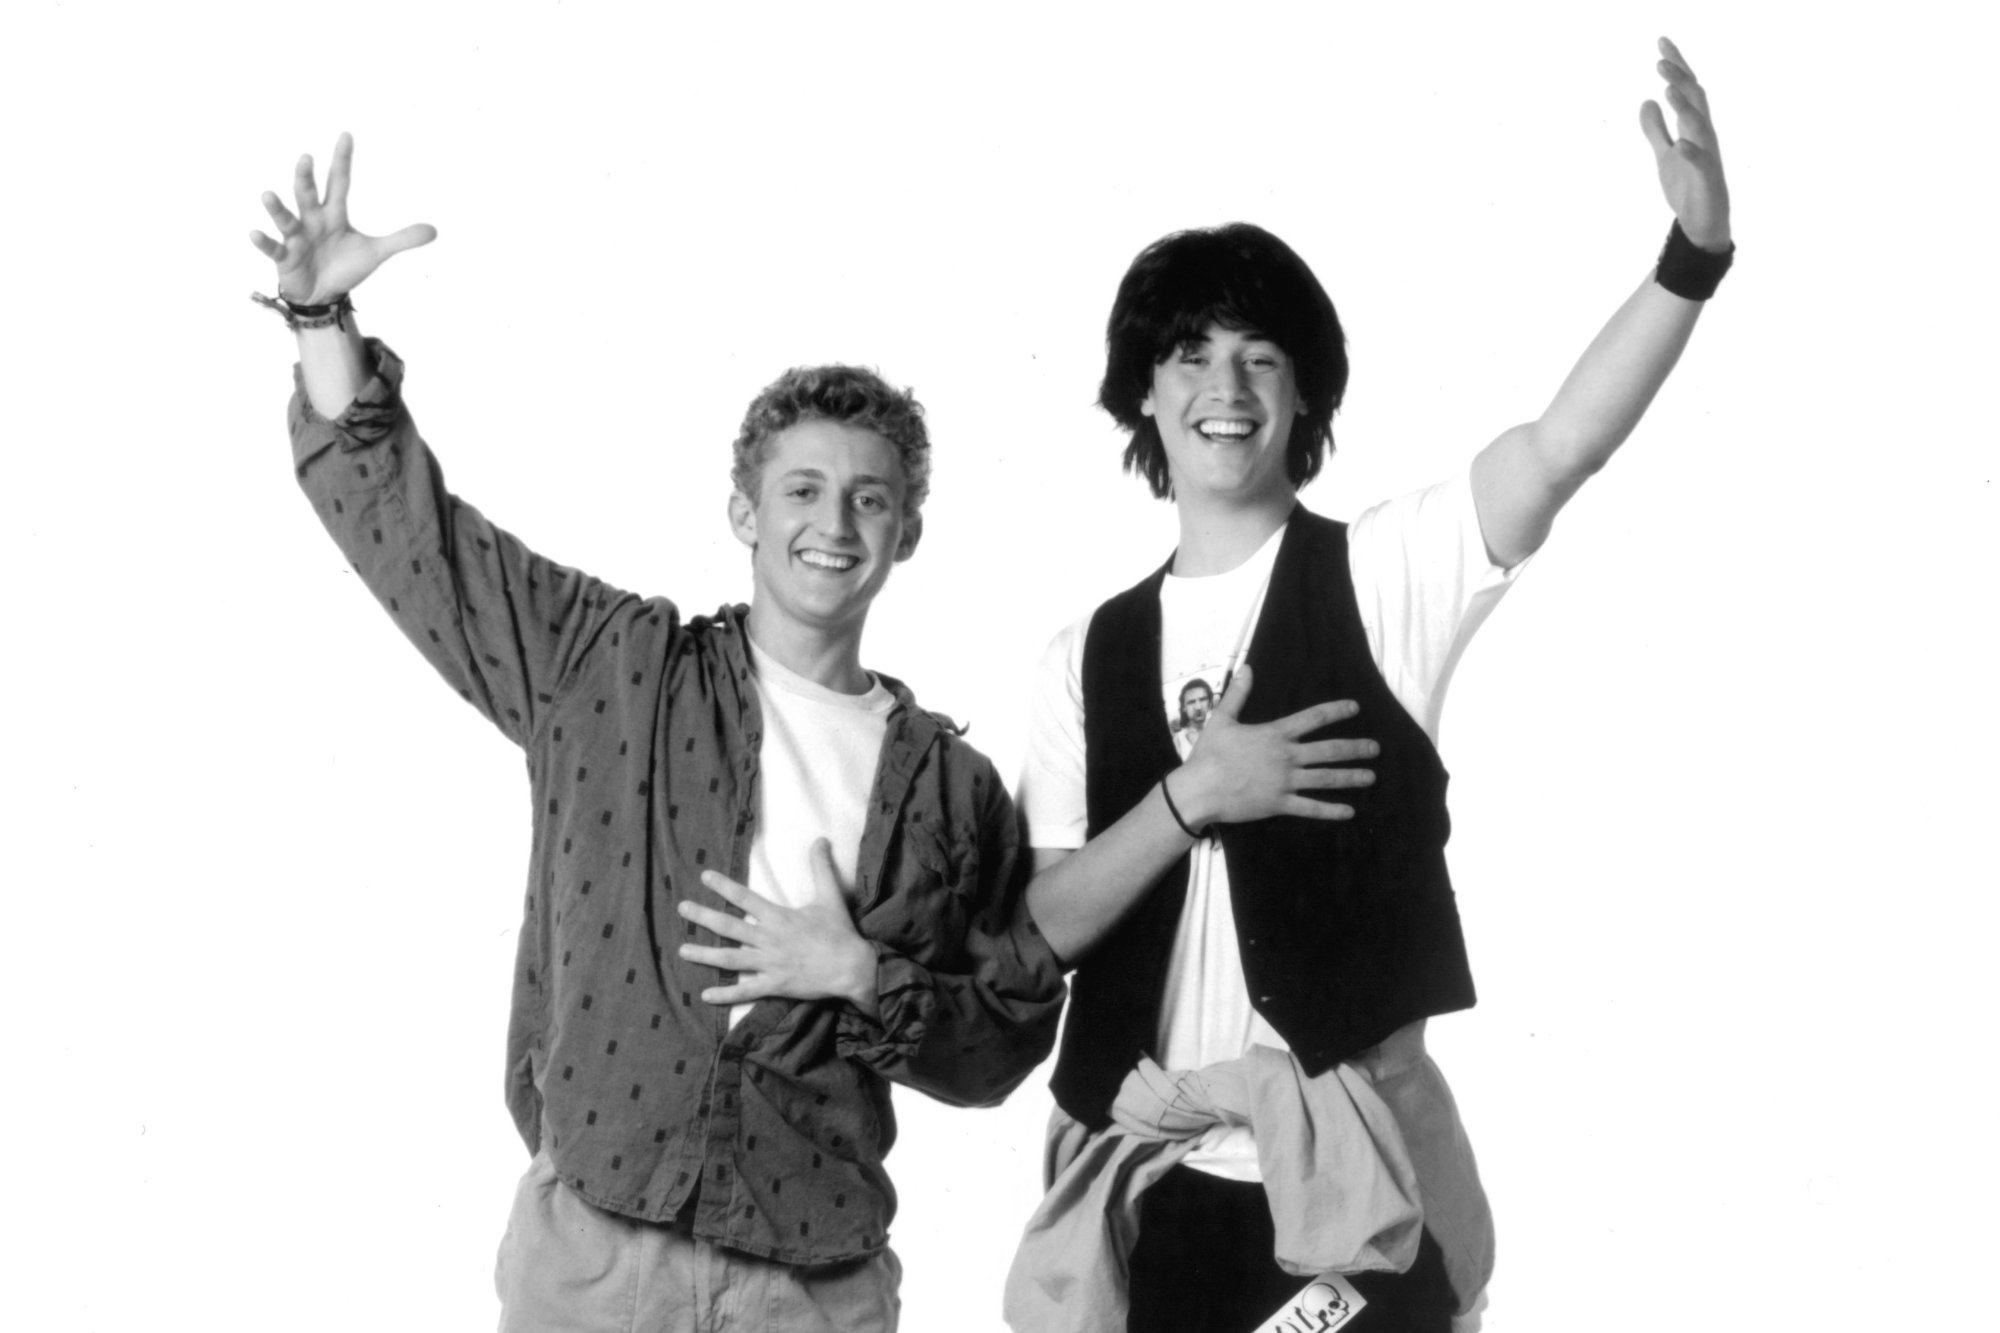 'Bill & Ted's Excellent Adventure' Alex Winter as Bill Preston and Keanu Reeves as Ted Logan holding an arm up in black-and-white photo